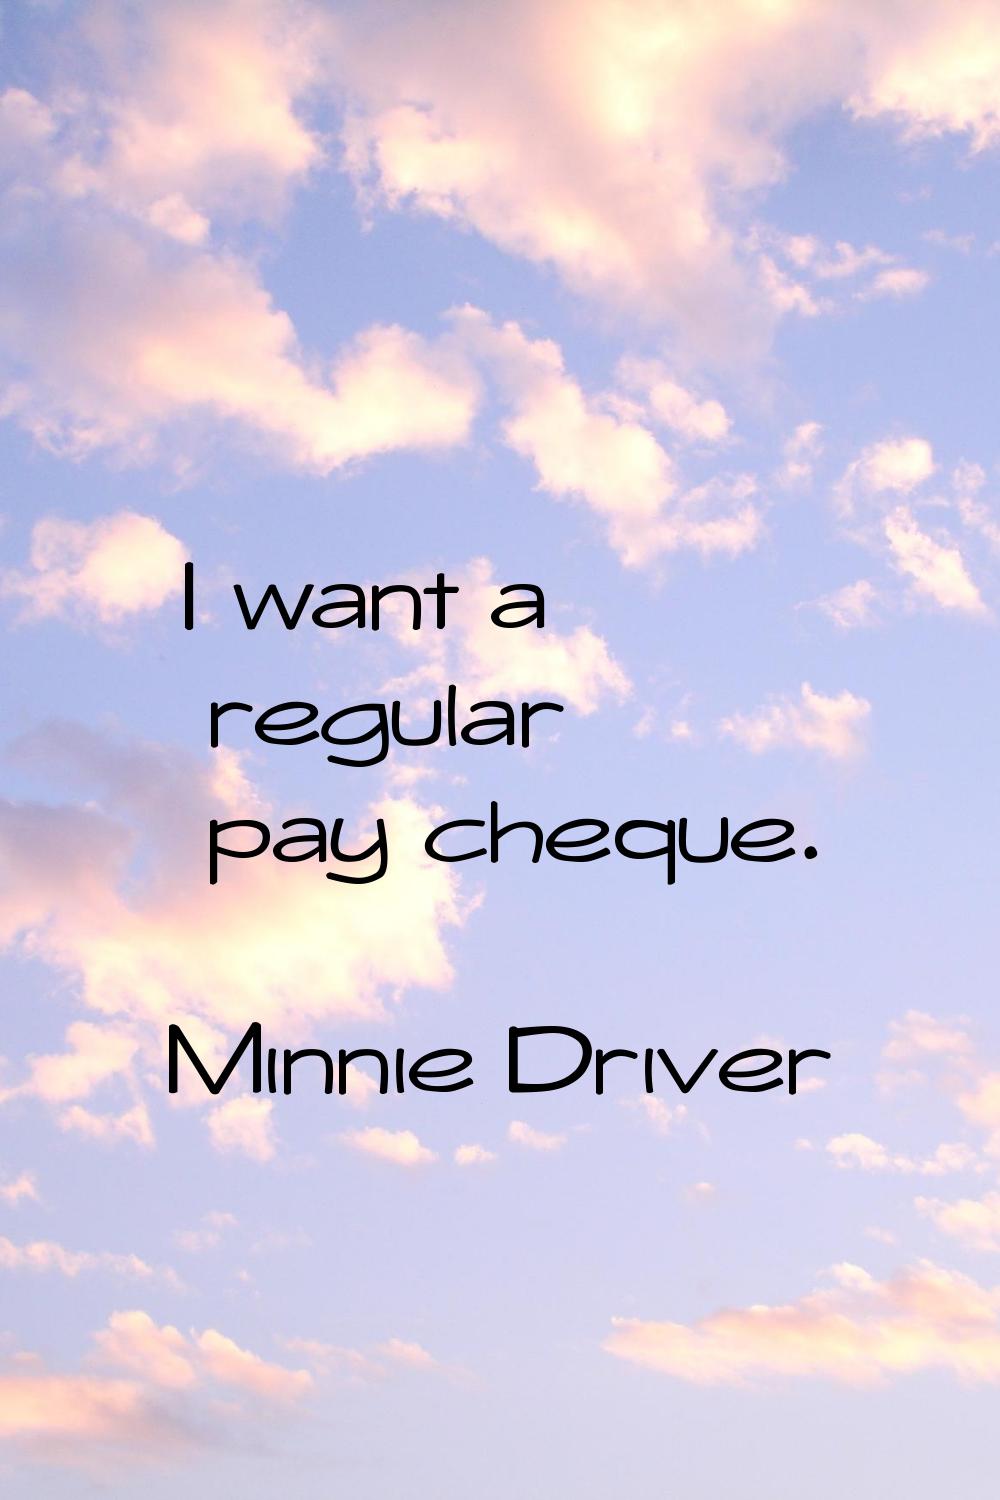 I want a regular pay cheque.